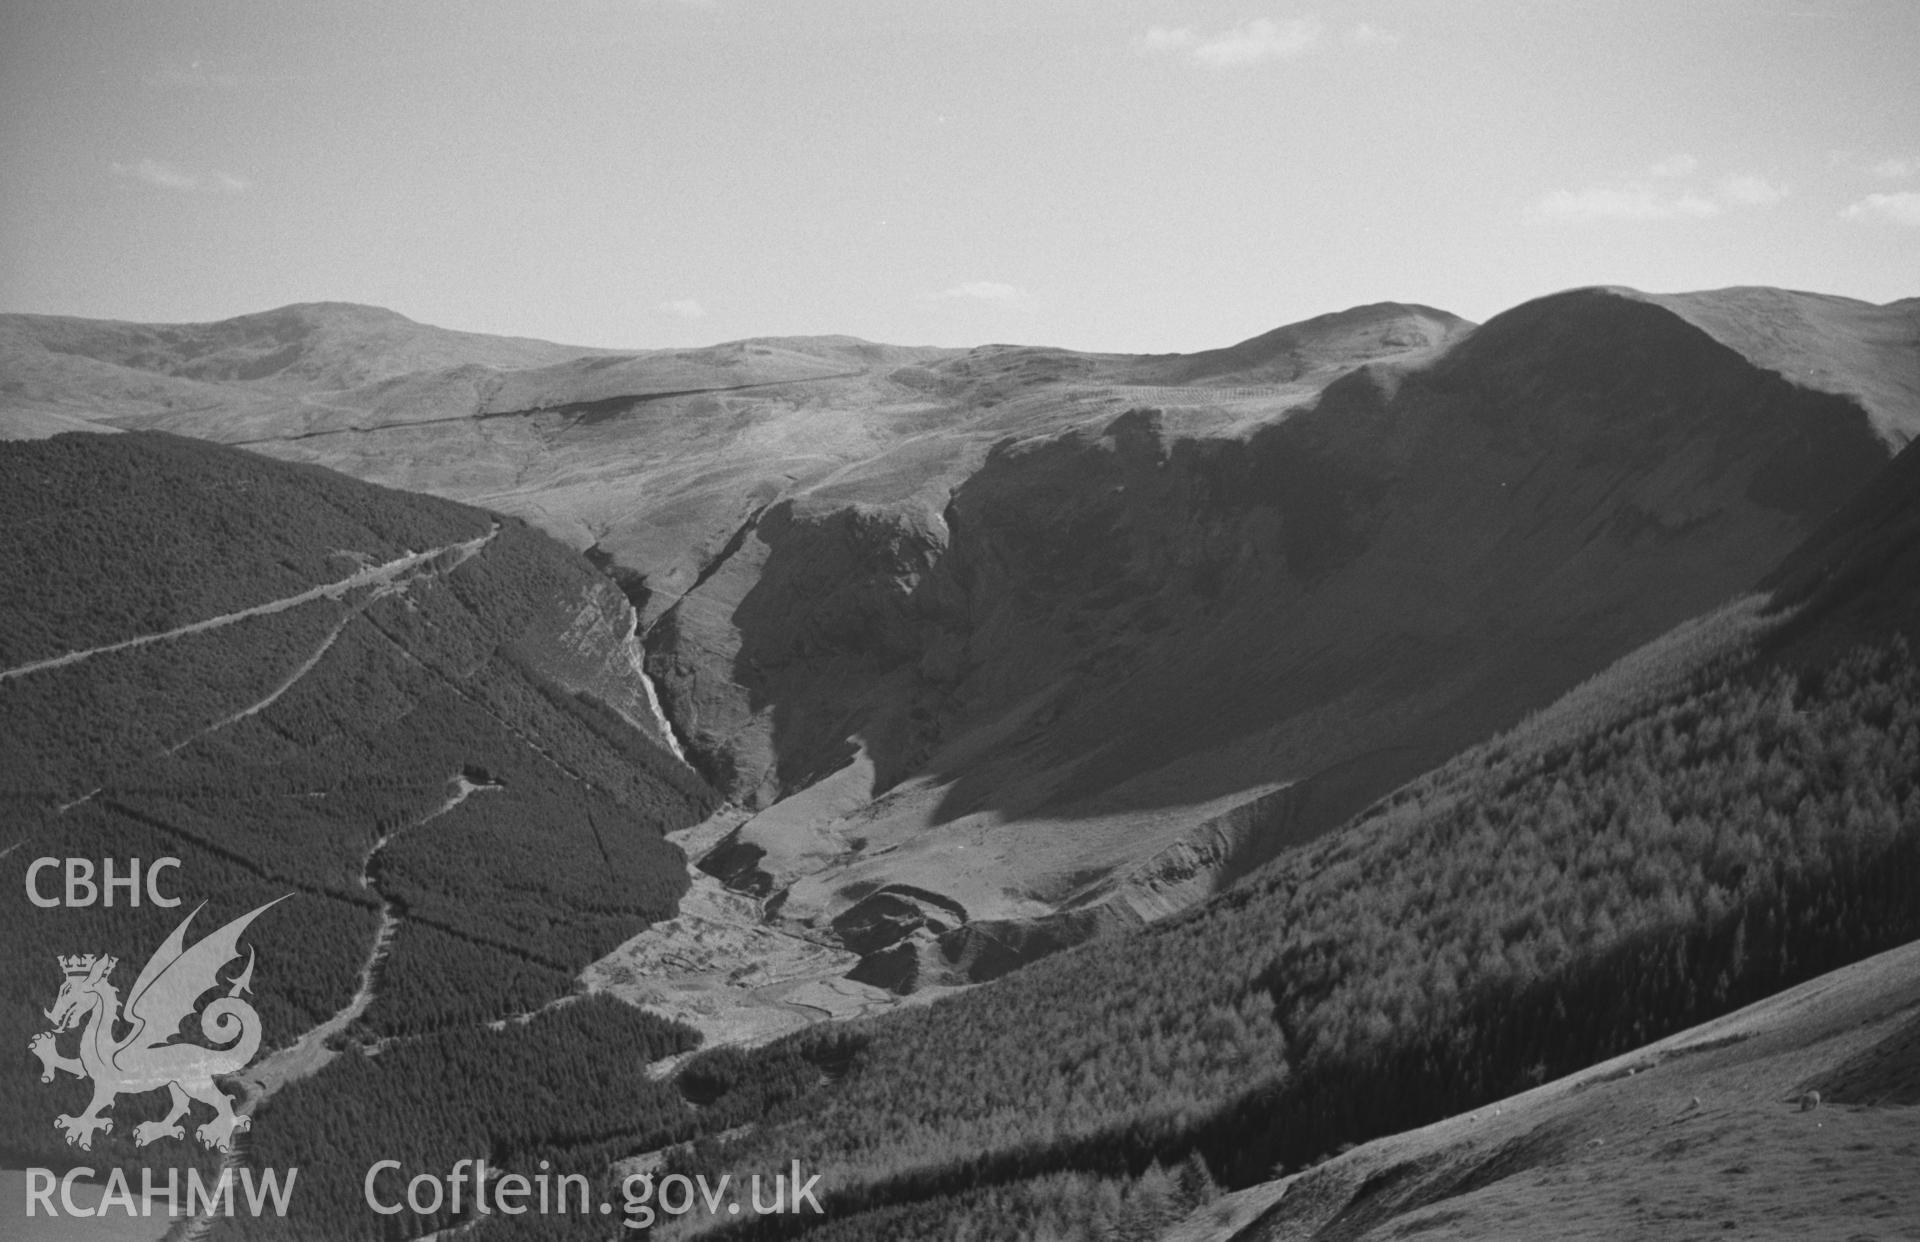 Black and White photograph showing view along Creigiau Bwlch-Hyddgen towards Plynlimon. Photographed by Arthur Chater in April 1962 from Grid Reference SN 773 949, looking south south-east.